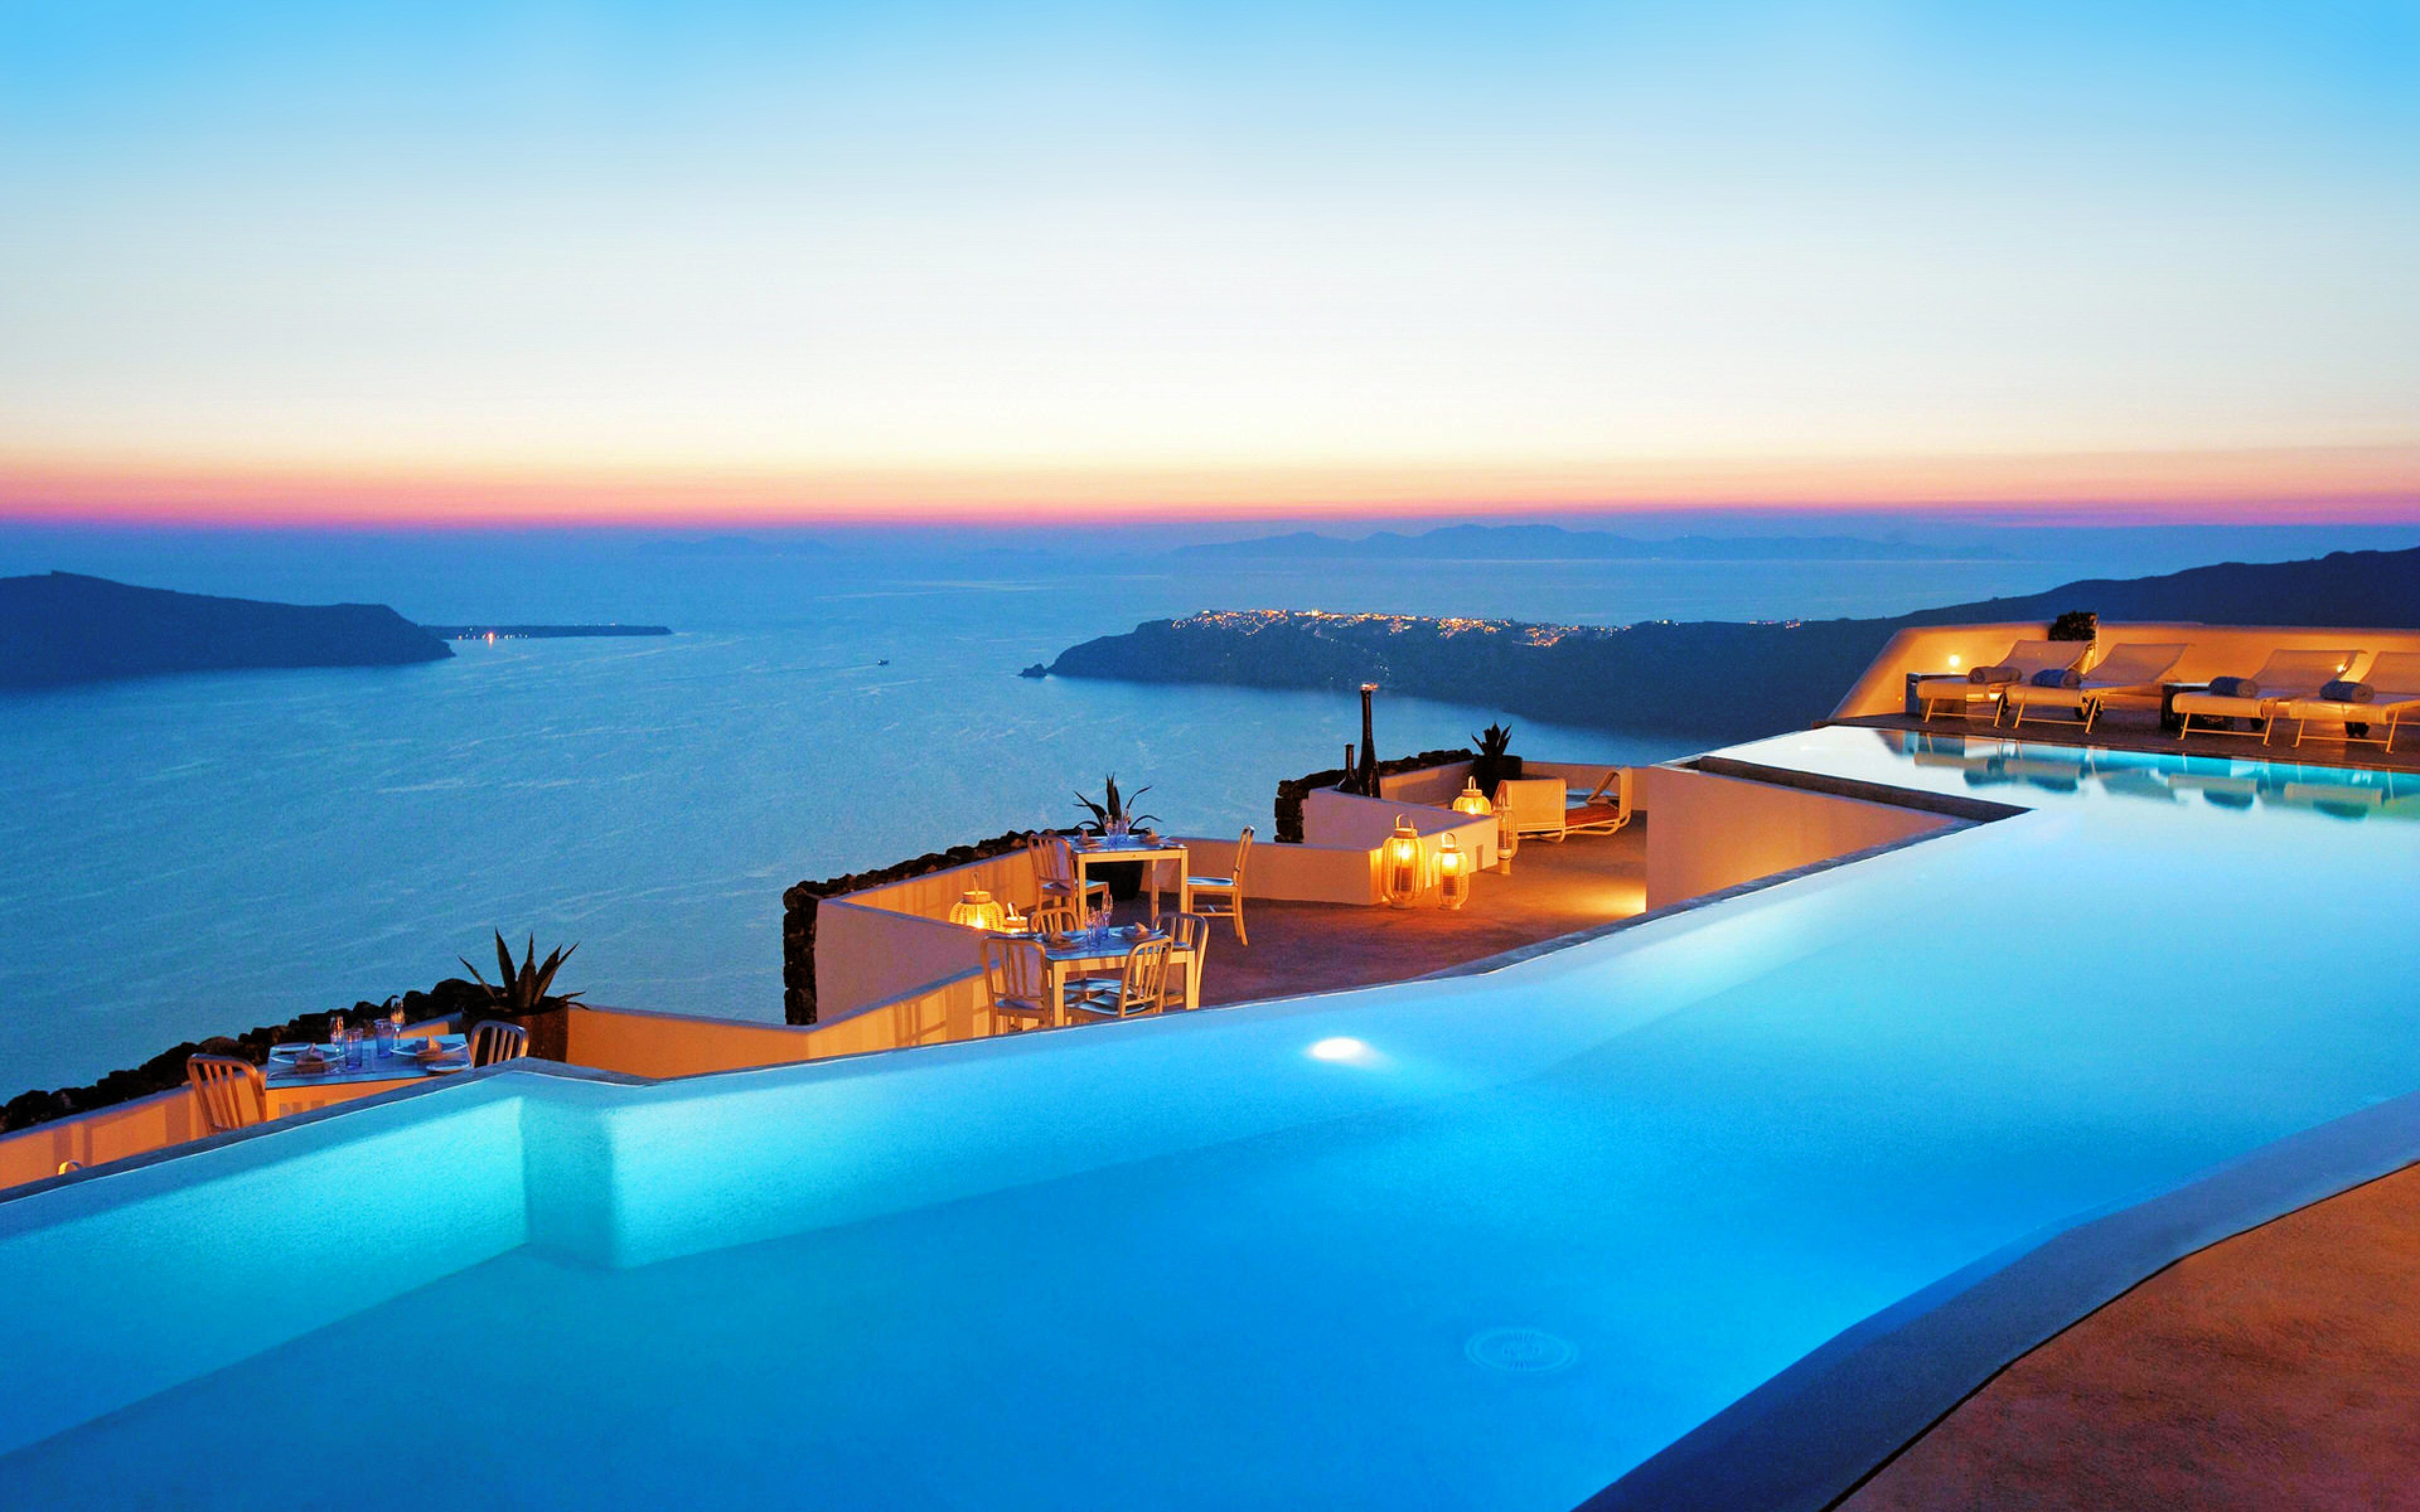 HD Santorini Puter Background Id For